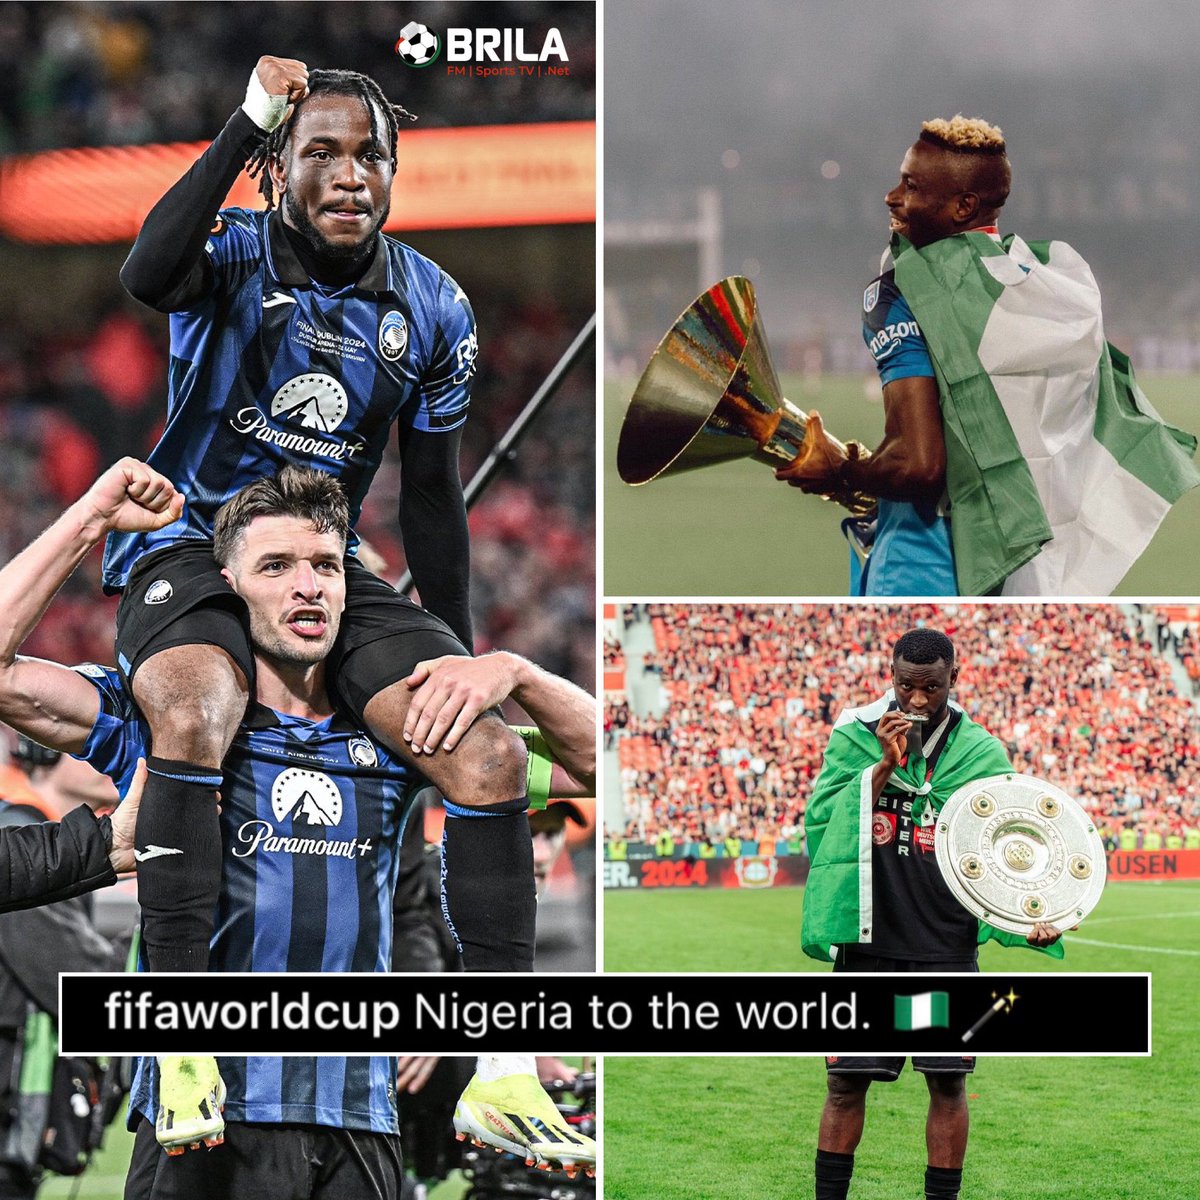 Exactly what FIFA said!!!🔥

Victor Osimhen inspired Napoli to win its 1st Scudetto in 33yrs.🏆

Victor Boniface Inspired Bayer Leverkusen to win their 1st Bundesliga title after 120 years.🏆

Ademola Lookman wins Atalanta their 1st ever Europa after 117 years.🏆

Naija boys 🇳🇬🤯